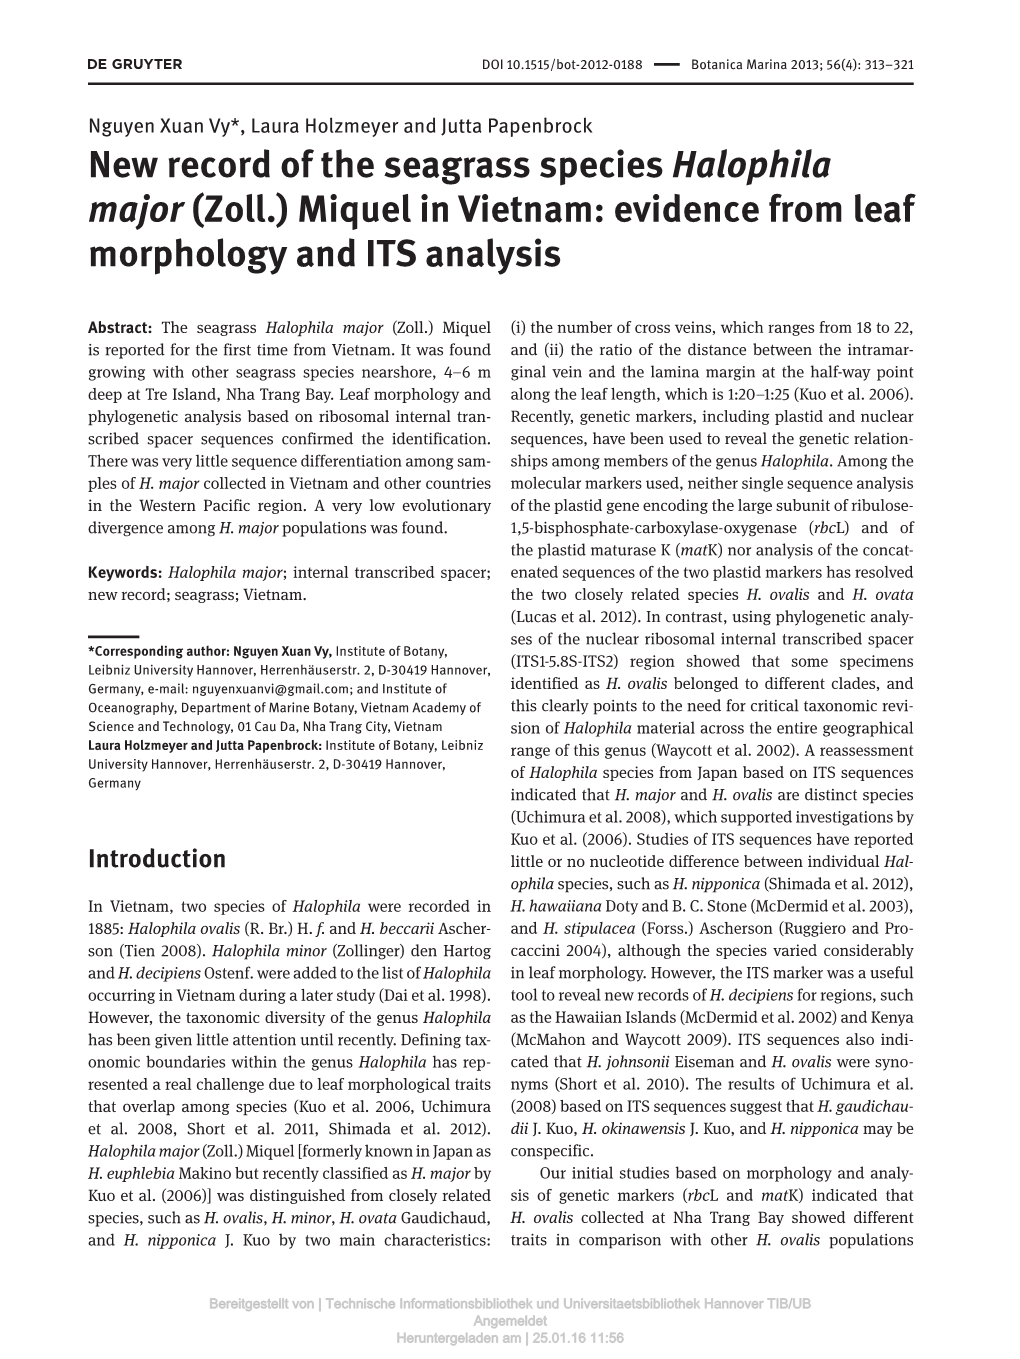 New Record of the Seagrass Species Halophila Major (Zoll.) Miquel in Vietnam: Evidence from Leaf Morphology and ITS Analysis